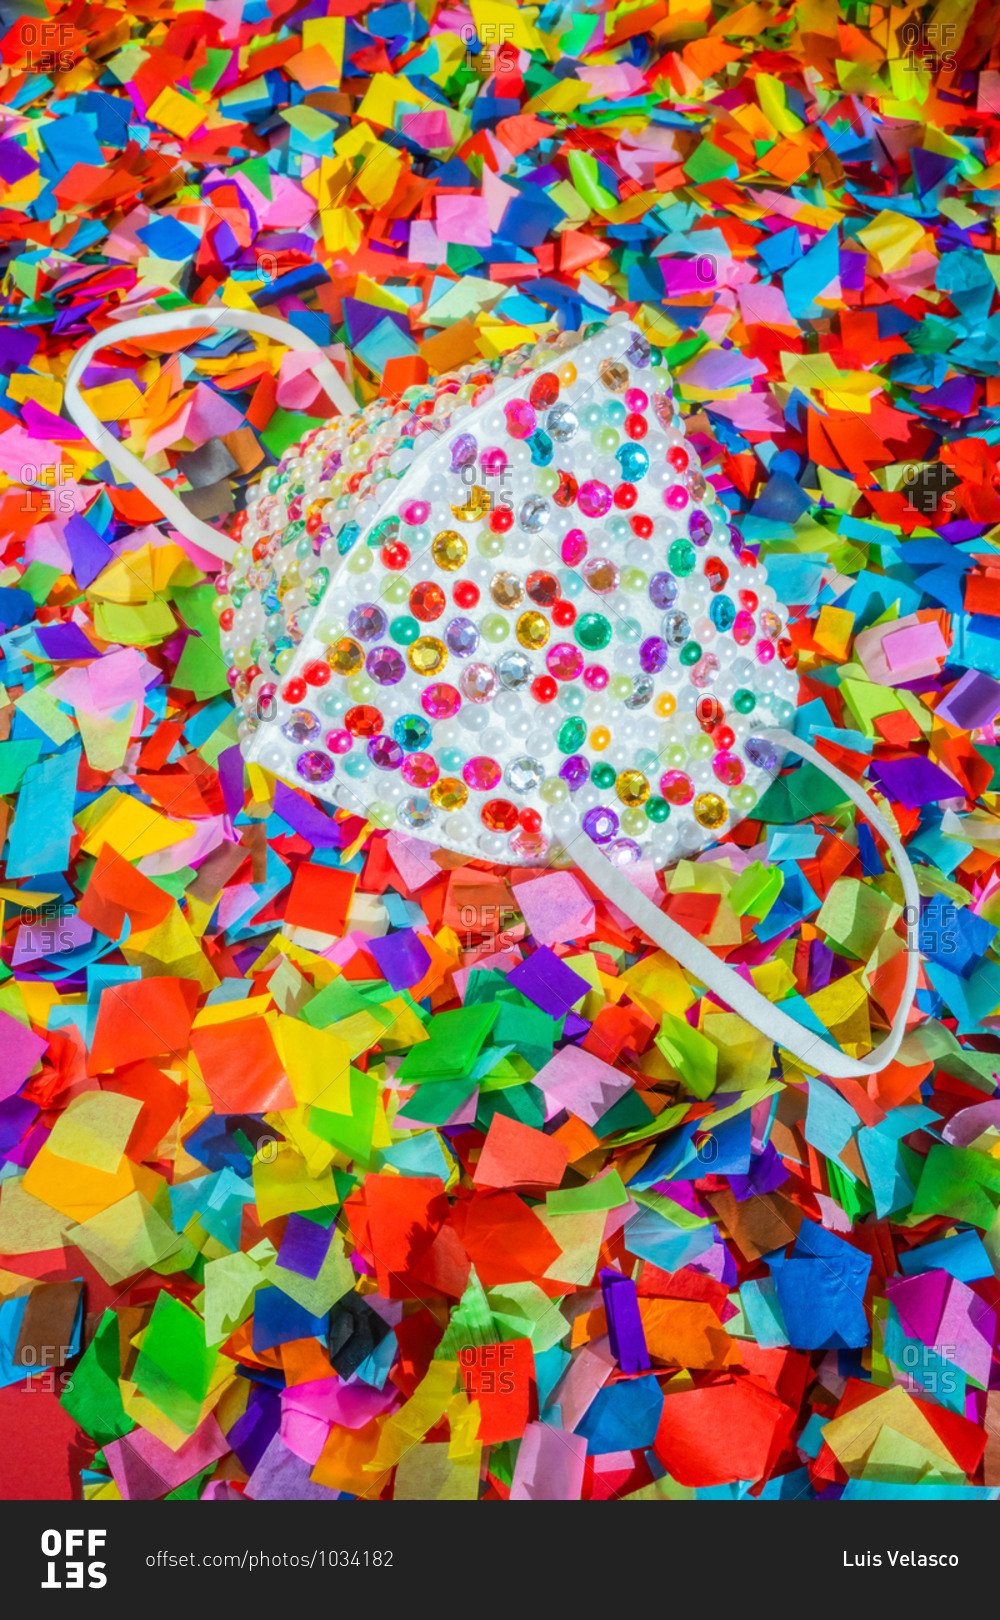 Protective mask covered in sequins and surrounded by confetti